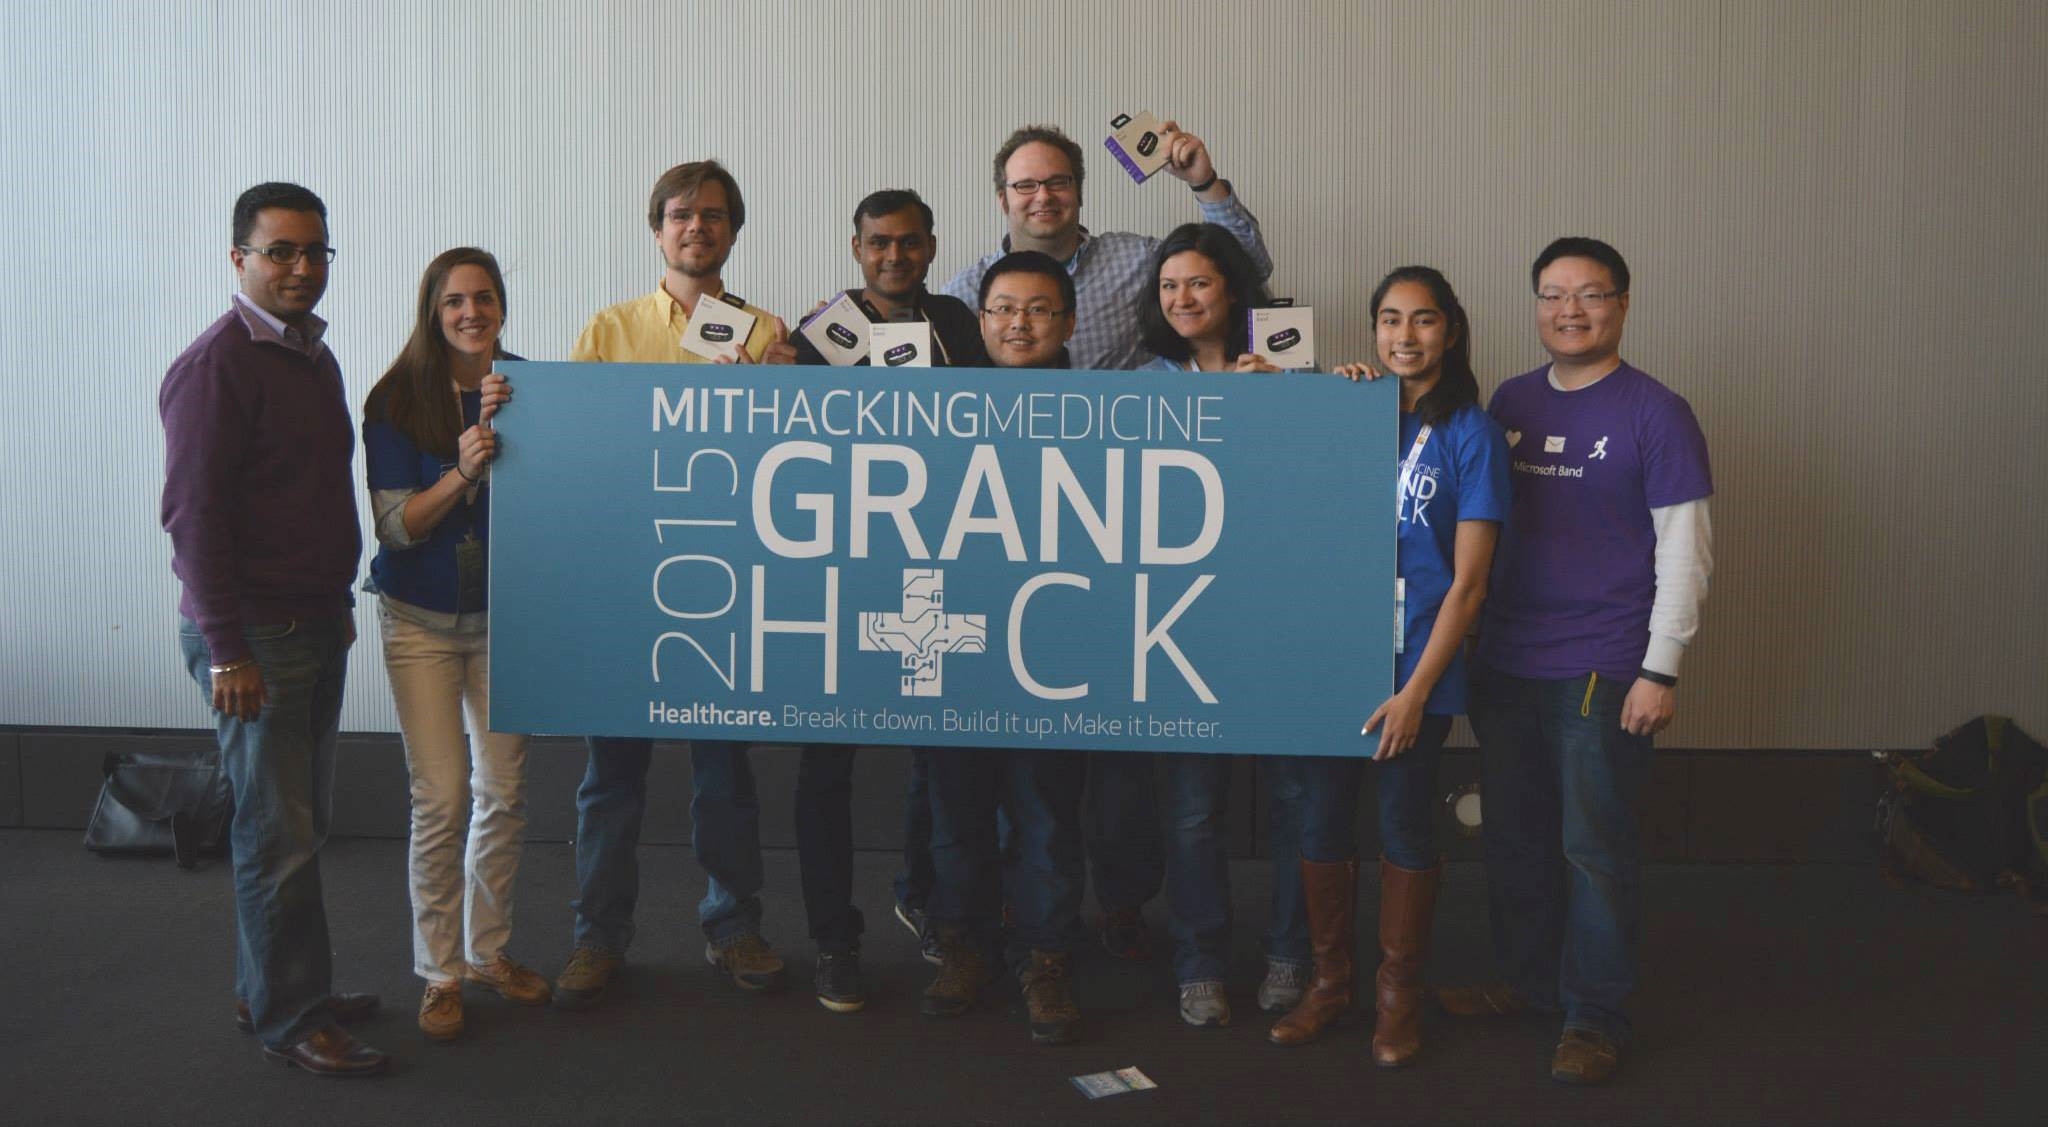 NaviNet is proud to have been recognized @ the MIT Hacking Medicine Grand Hack!